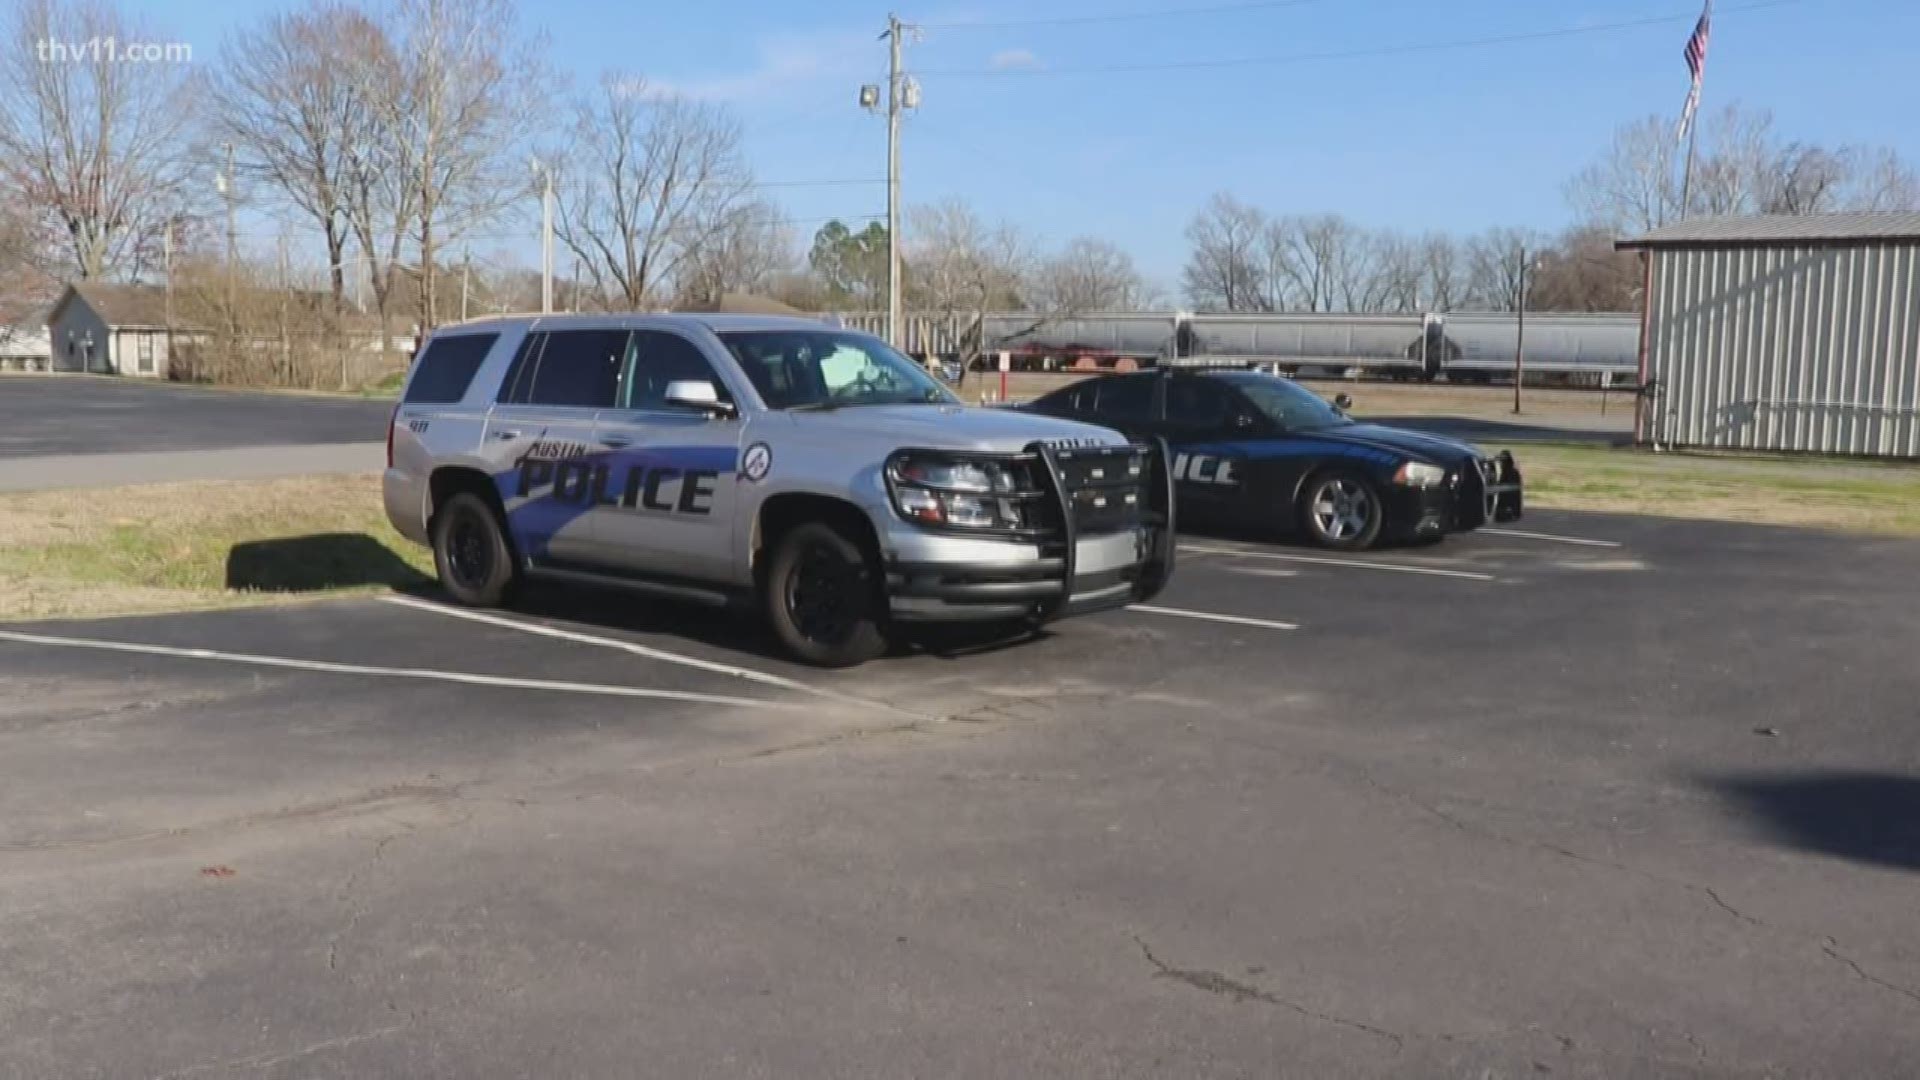 A rash of vehicles being broken into in the past few days has the Austin Police Department warning its community. They all happened to unlocked vehicles.